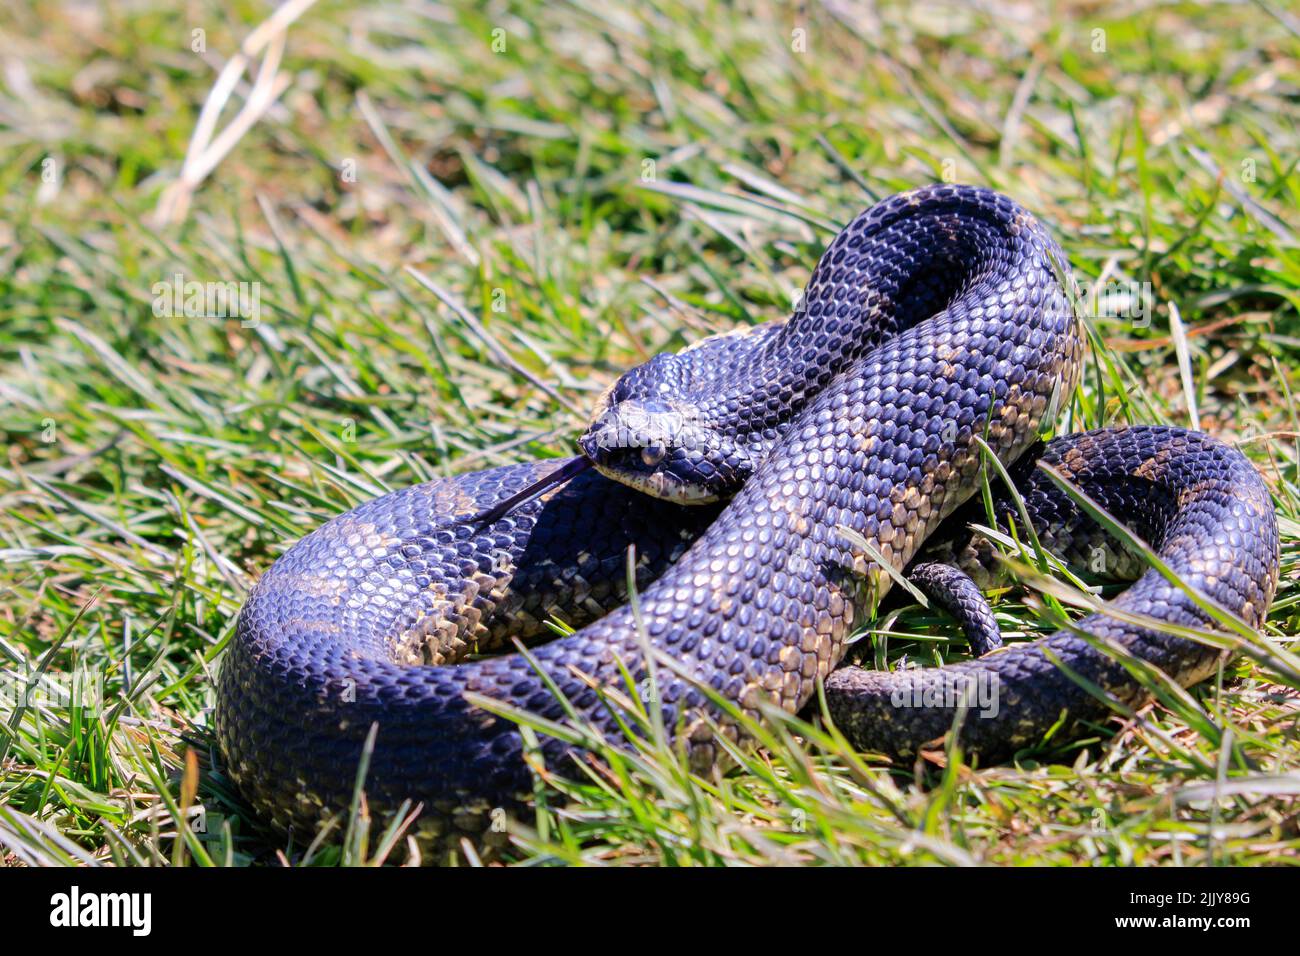 Eastern Hognose Snake with flattened neck on sandy soil with grass Stock Photo